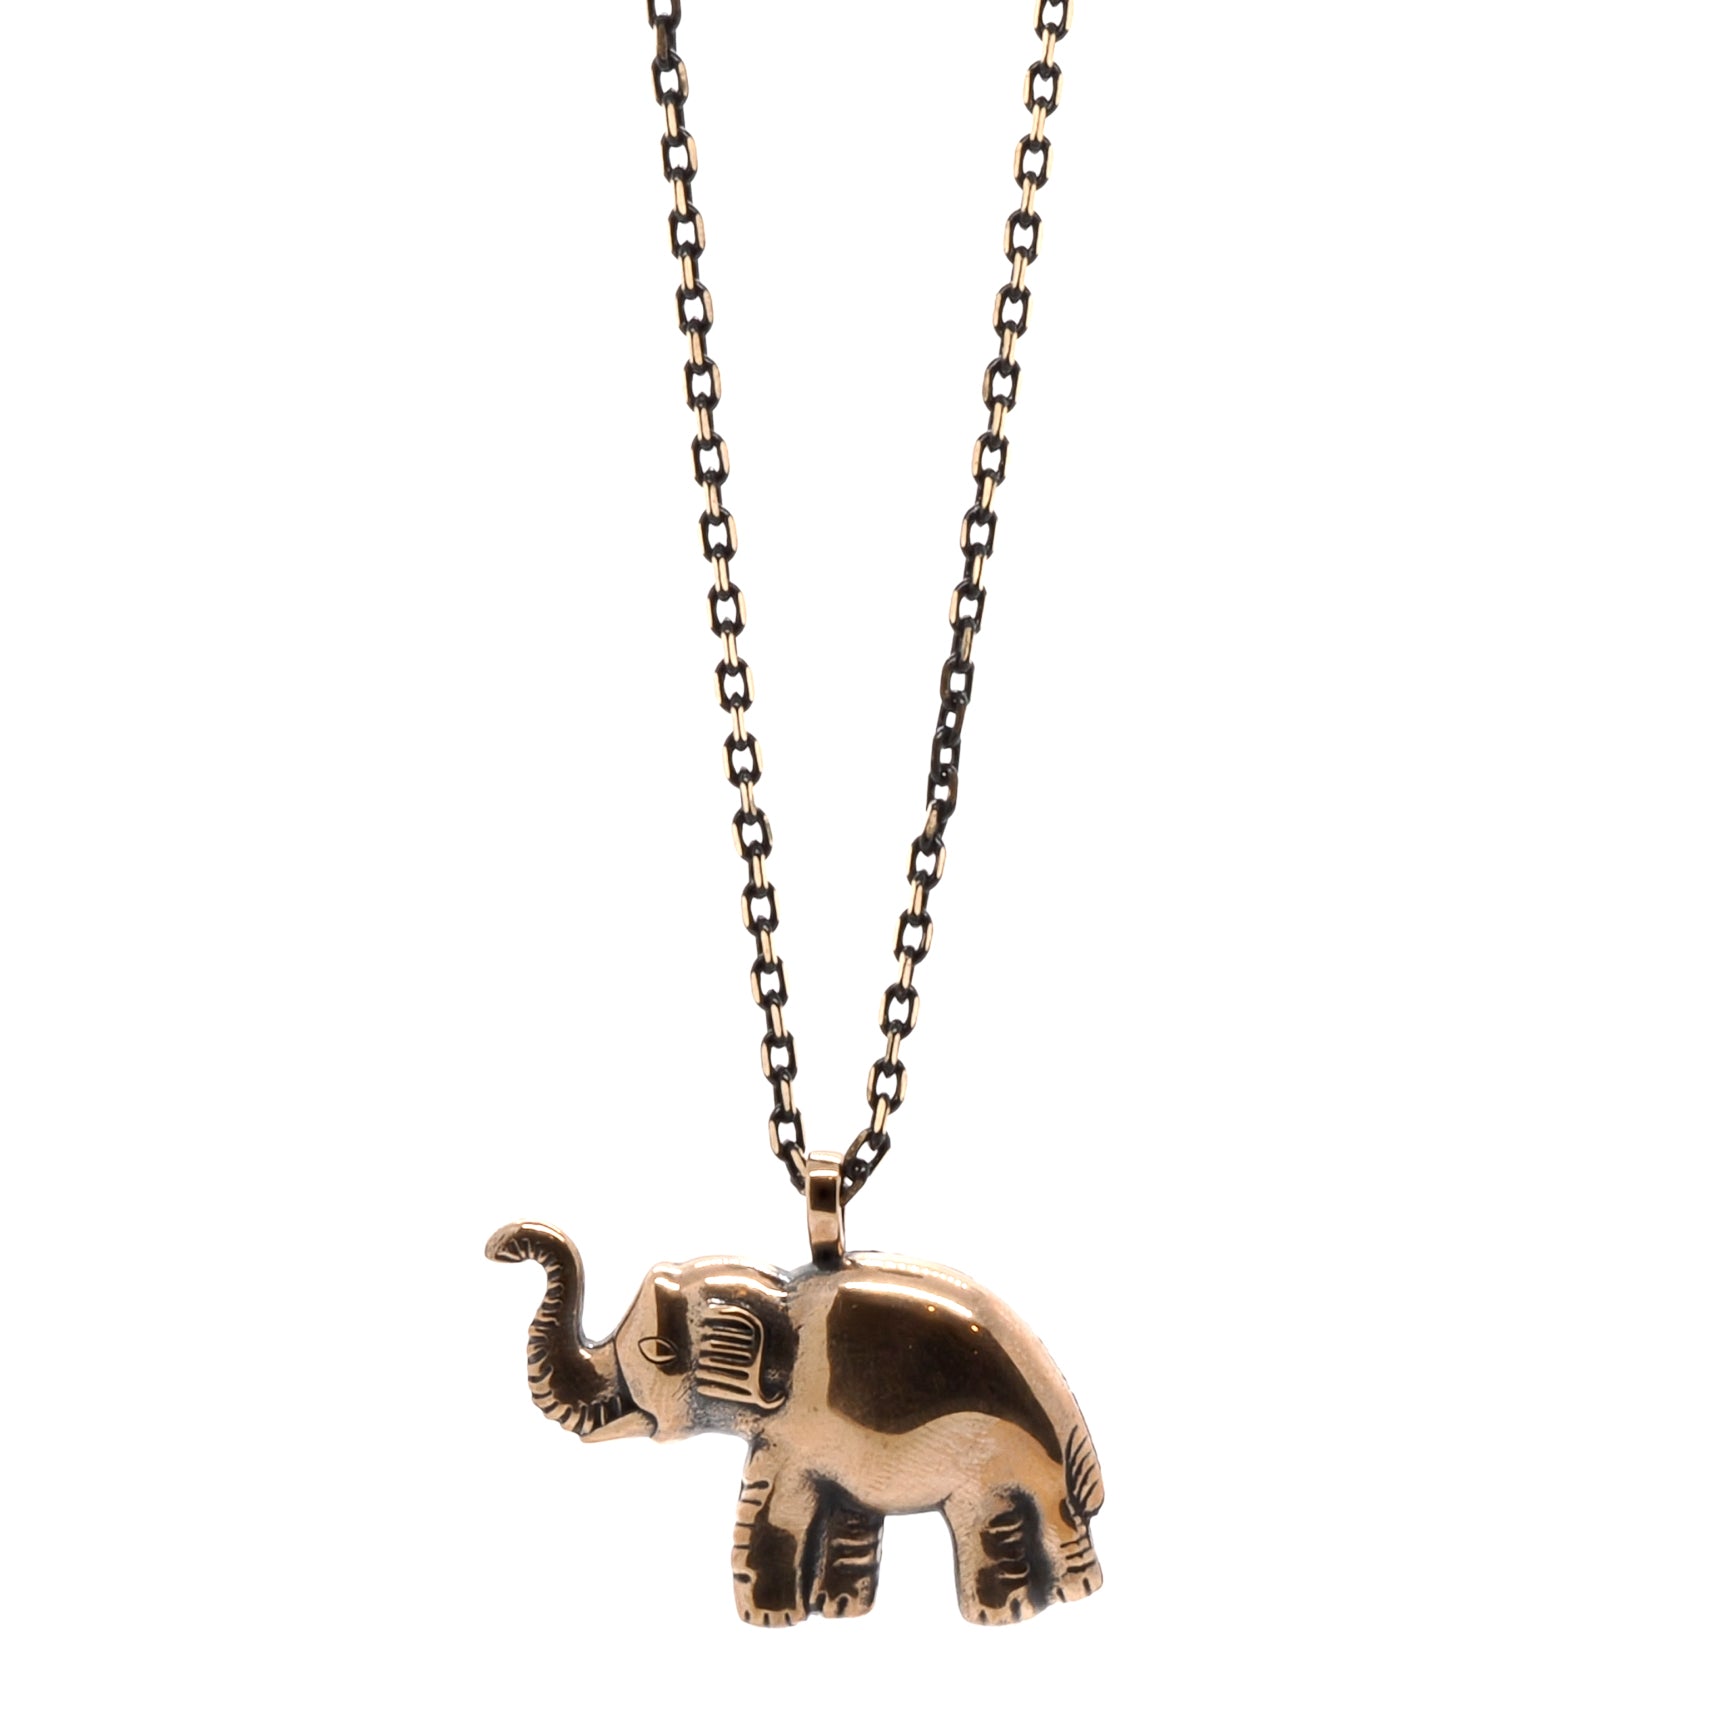 Handmade Beauty - The Symbol of Luck Elephant Necklace Showcases the Intricately Crafted Bronze Pendant.